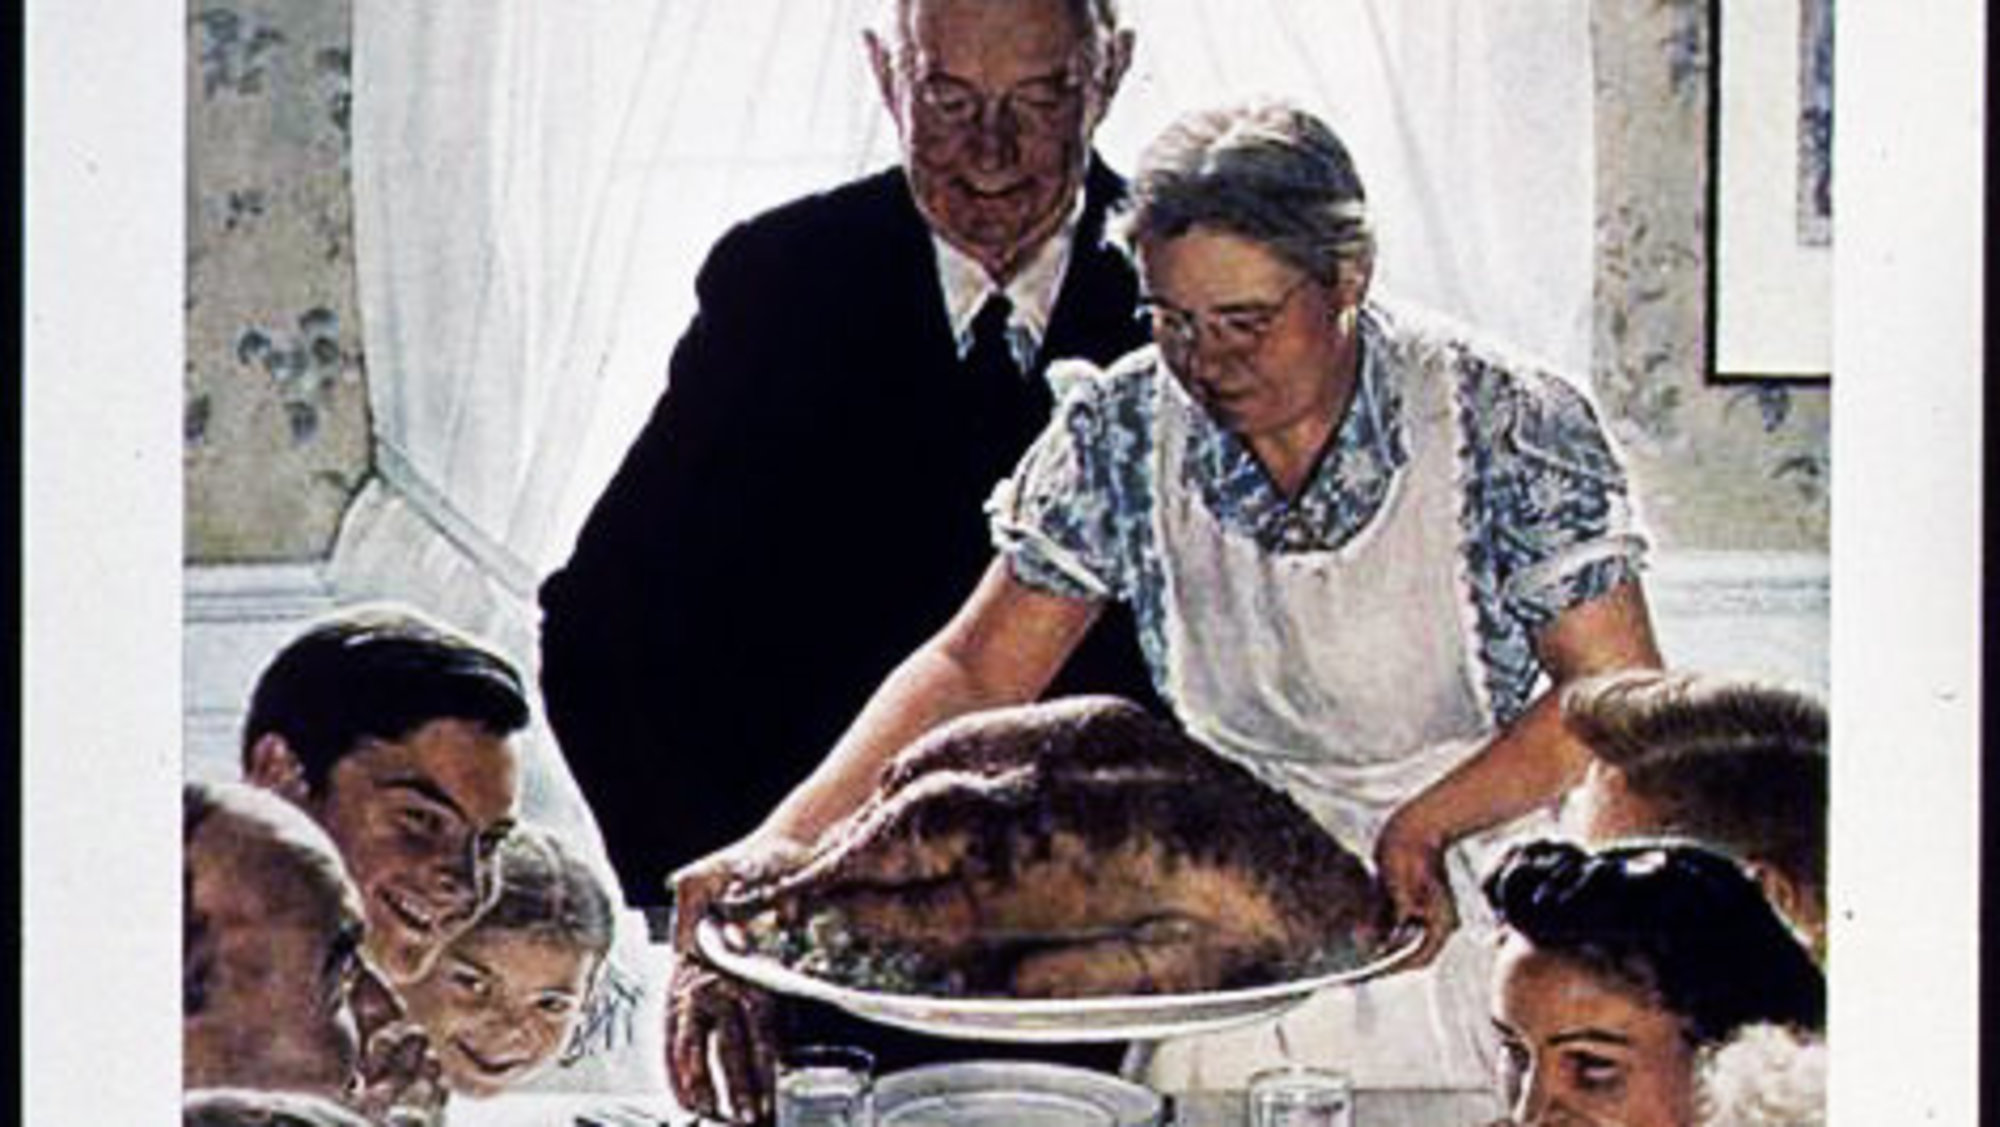 Ah, a traditional Thanksgiving dinner, where the wife does all the work and the husband just carves the bird, then watches football. But this year, our Thanksgiving was nothing like this scene. Not even close.